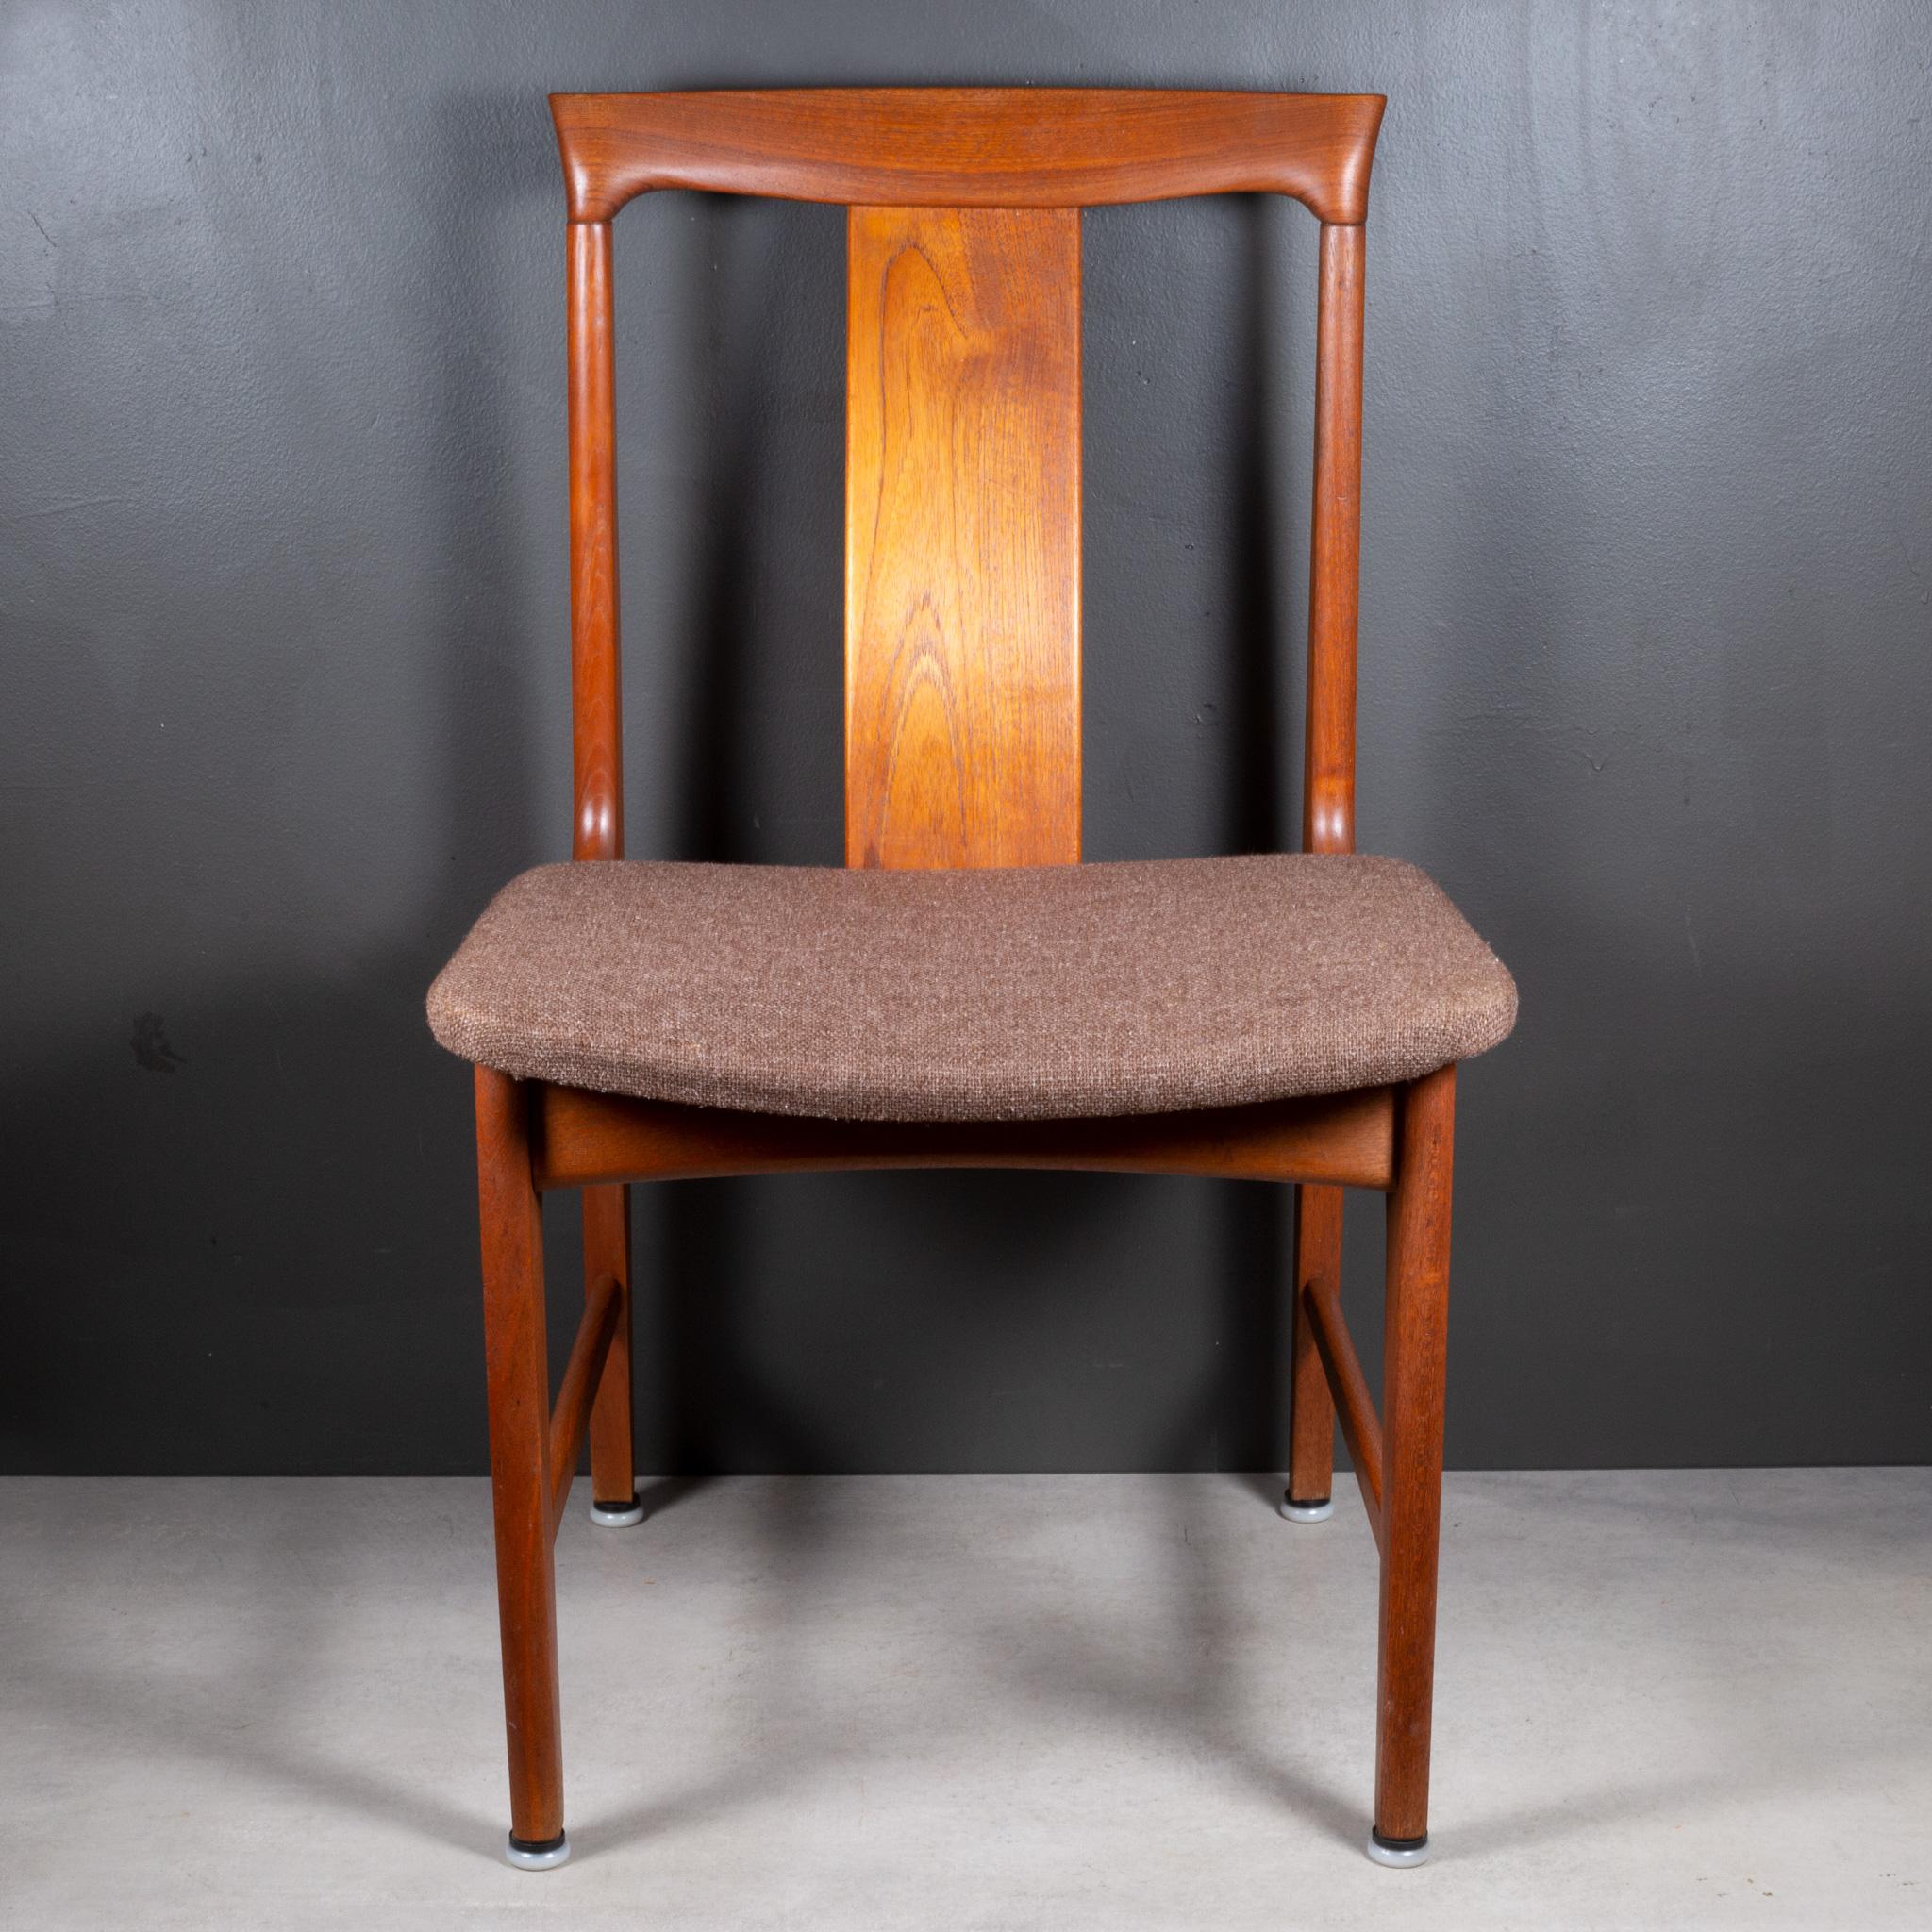 Midcentury Japanese Sculpted Teak Dining Chairs C.1960 For Sale 3